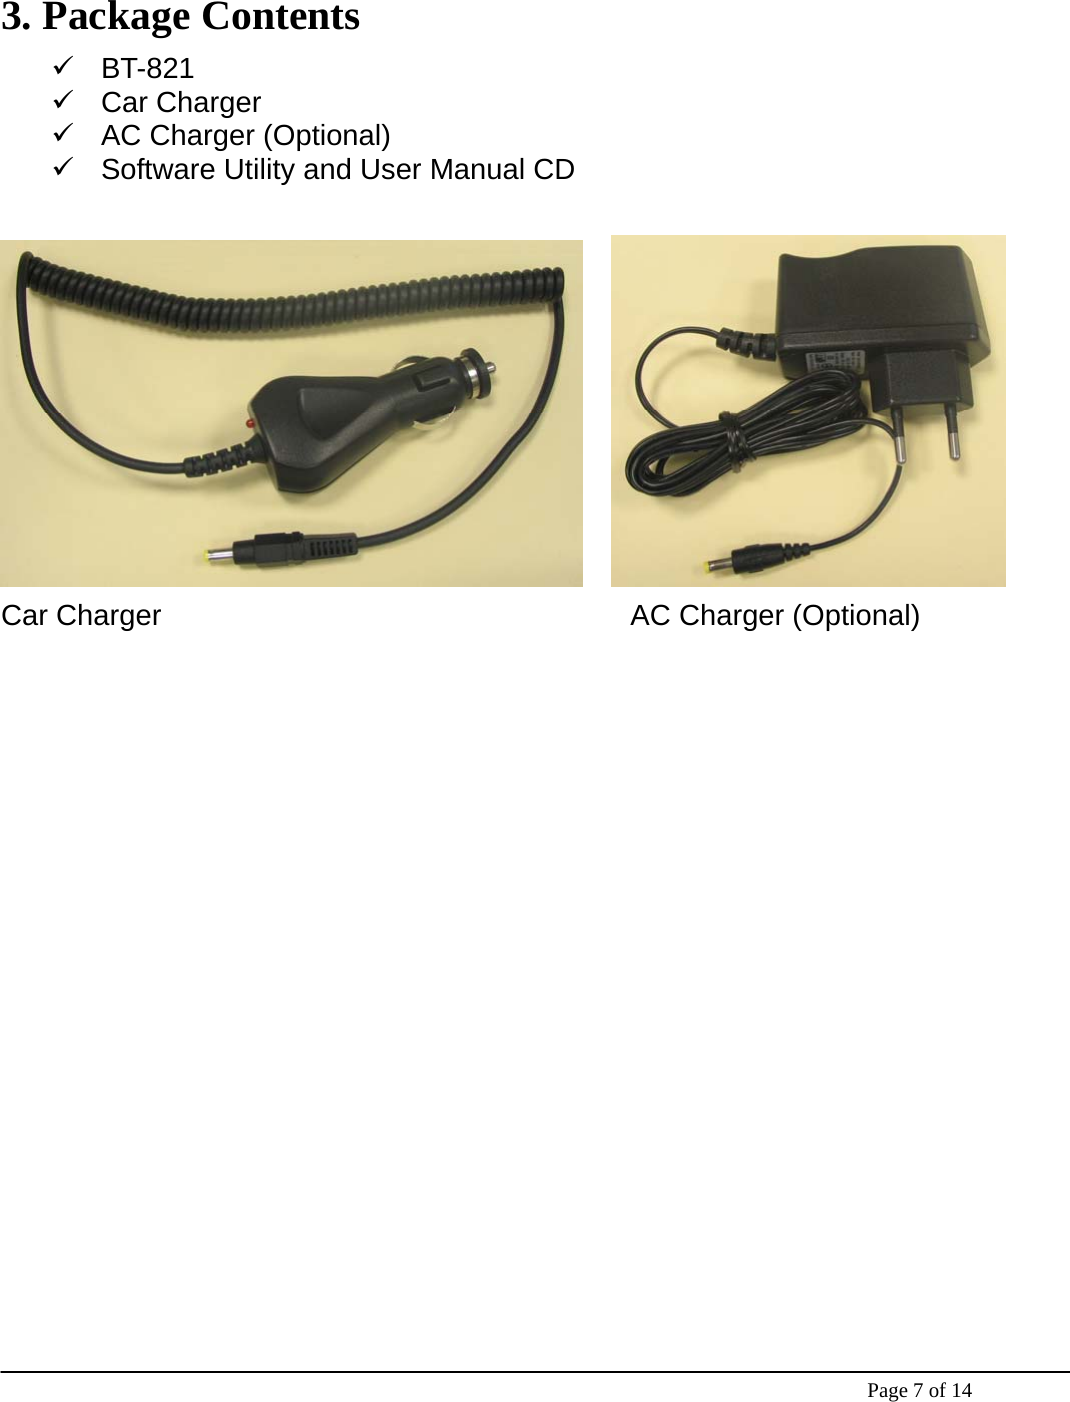    Page 7 of 14  3. Package Contents 9 BT-821  9 Car Charger  9  AC Charger (Optional)   9  Software Utility and User Manual CD        Car Charger           AC Charger (Optional)     